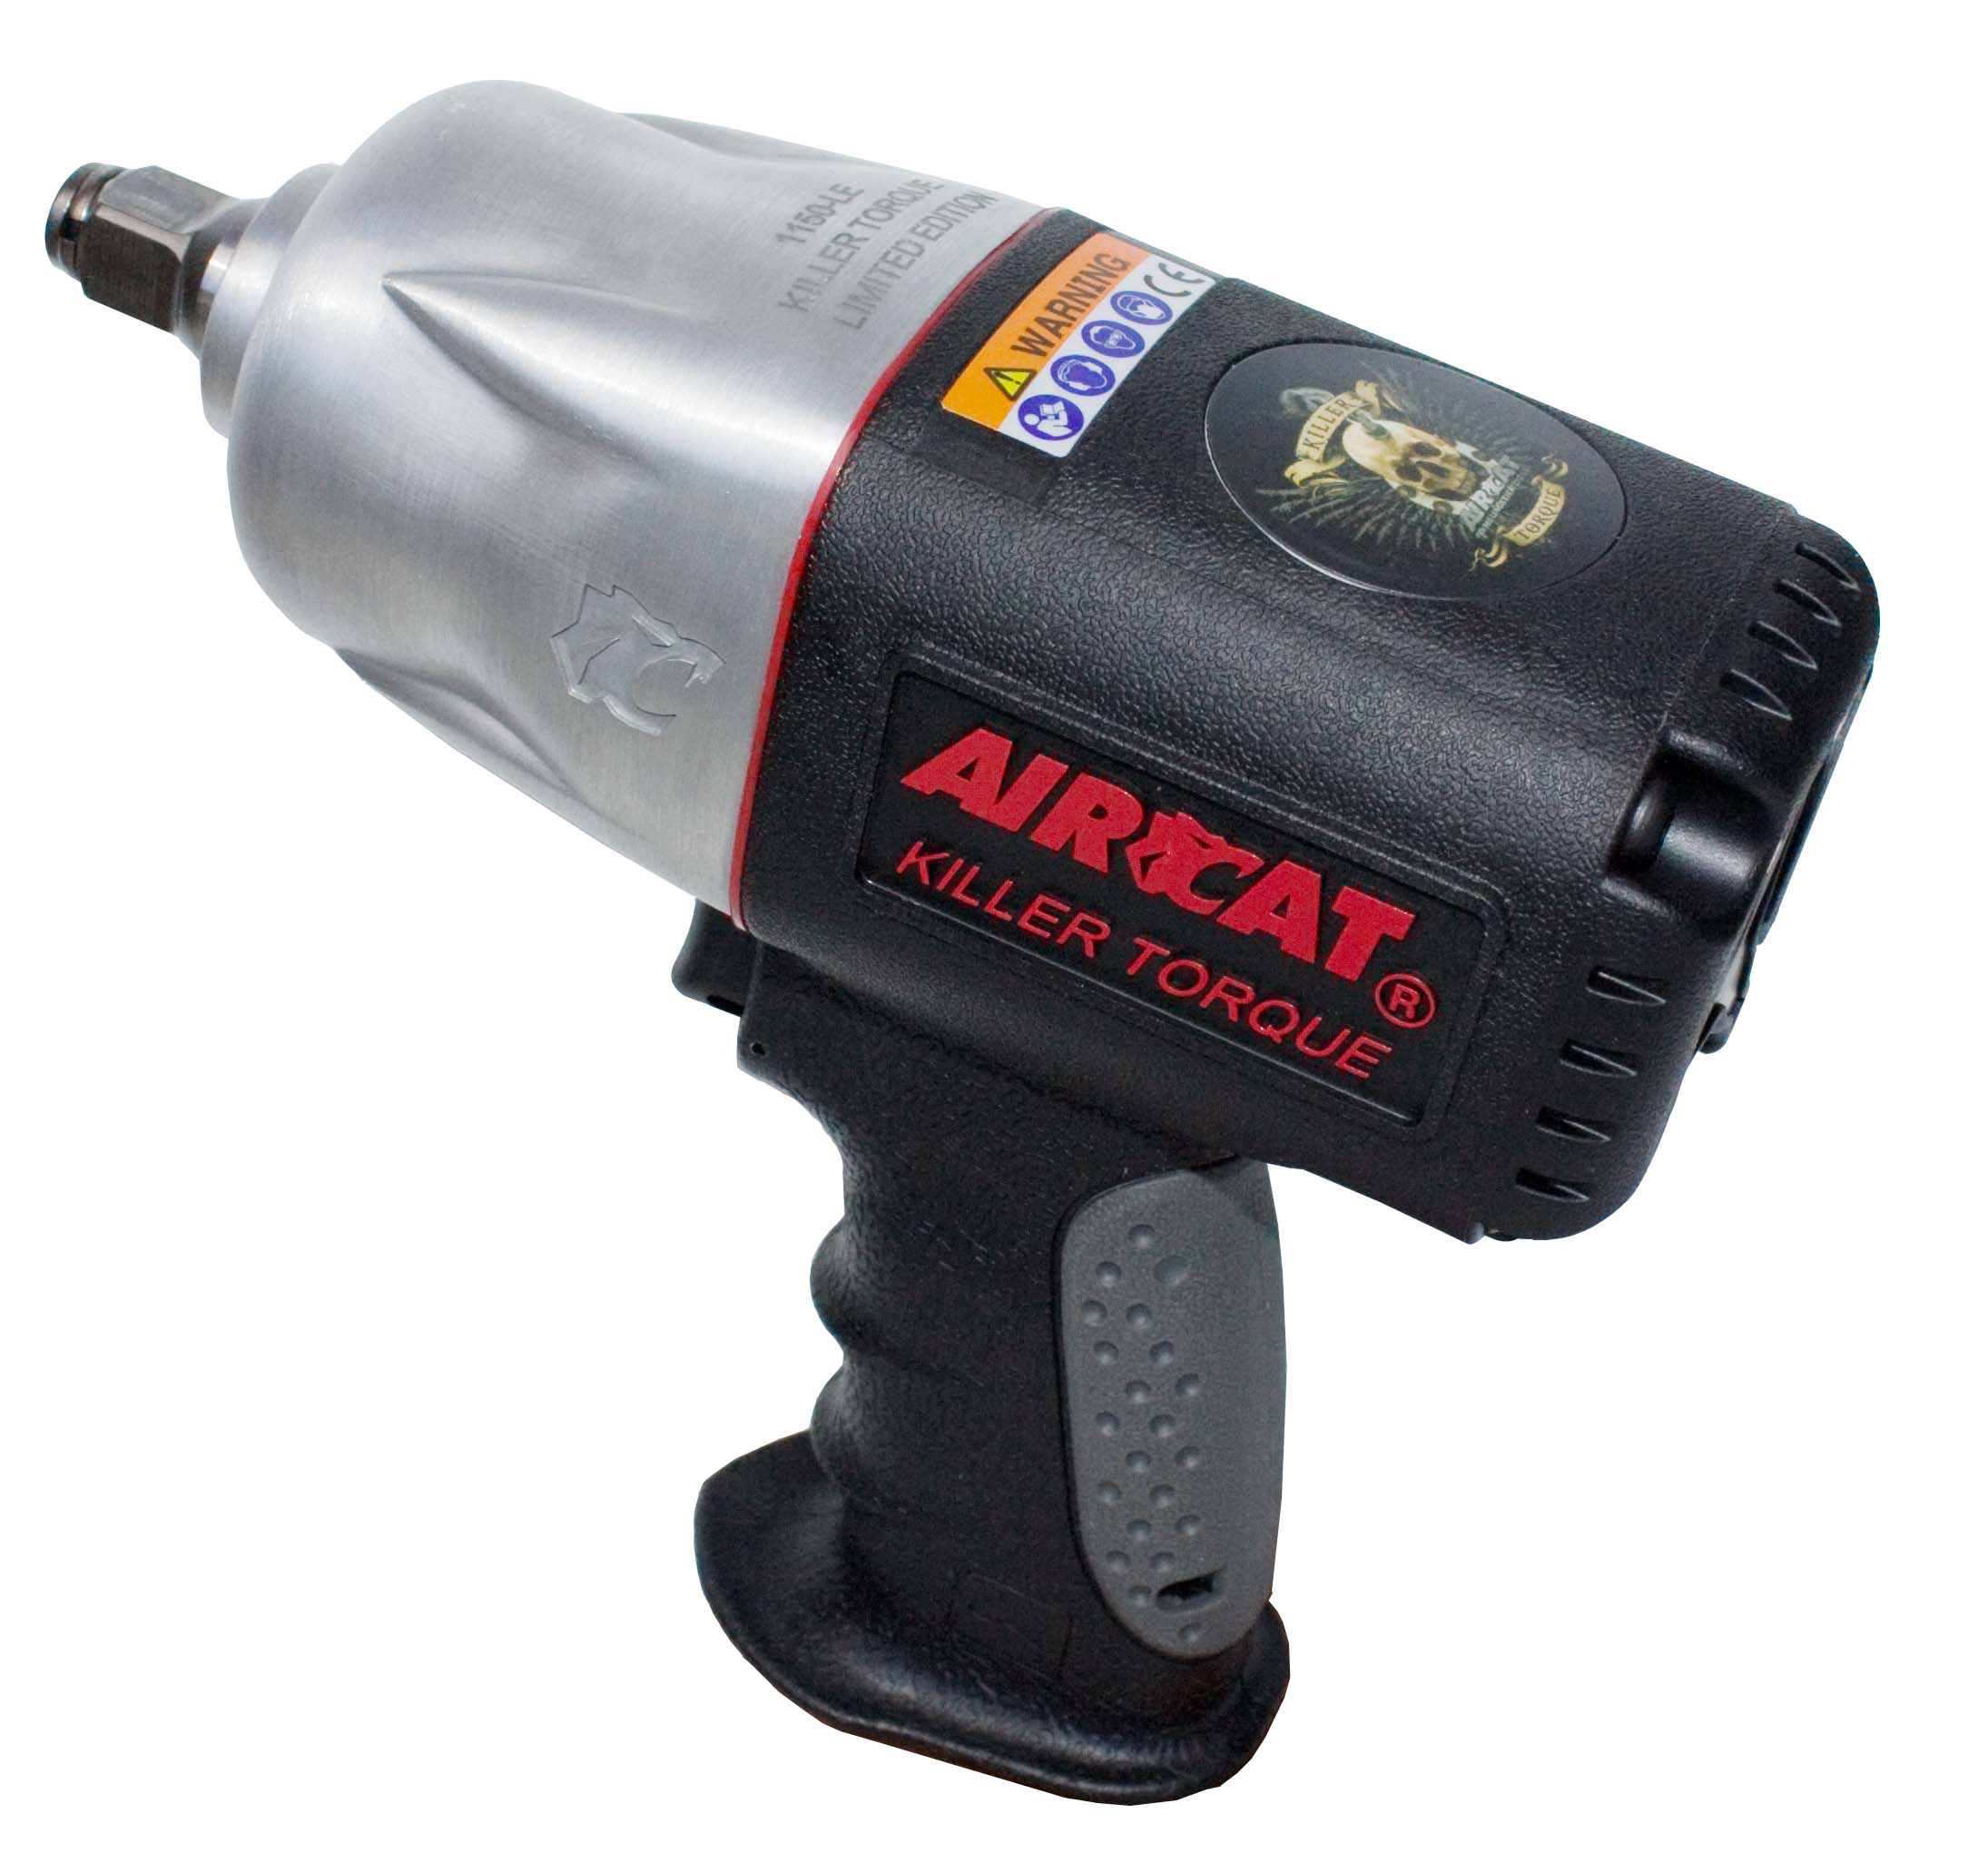 Limited Edition Killer Torque 1/2' Impact Wrench